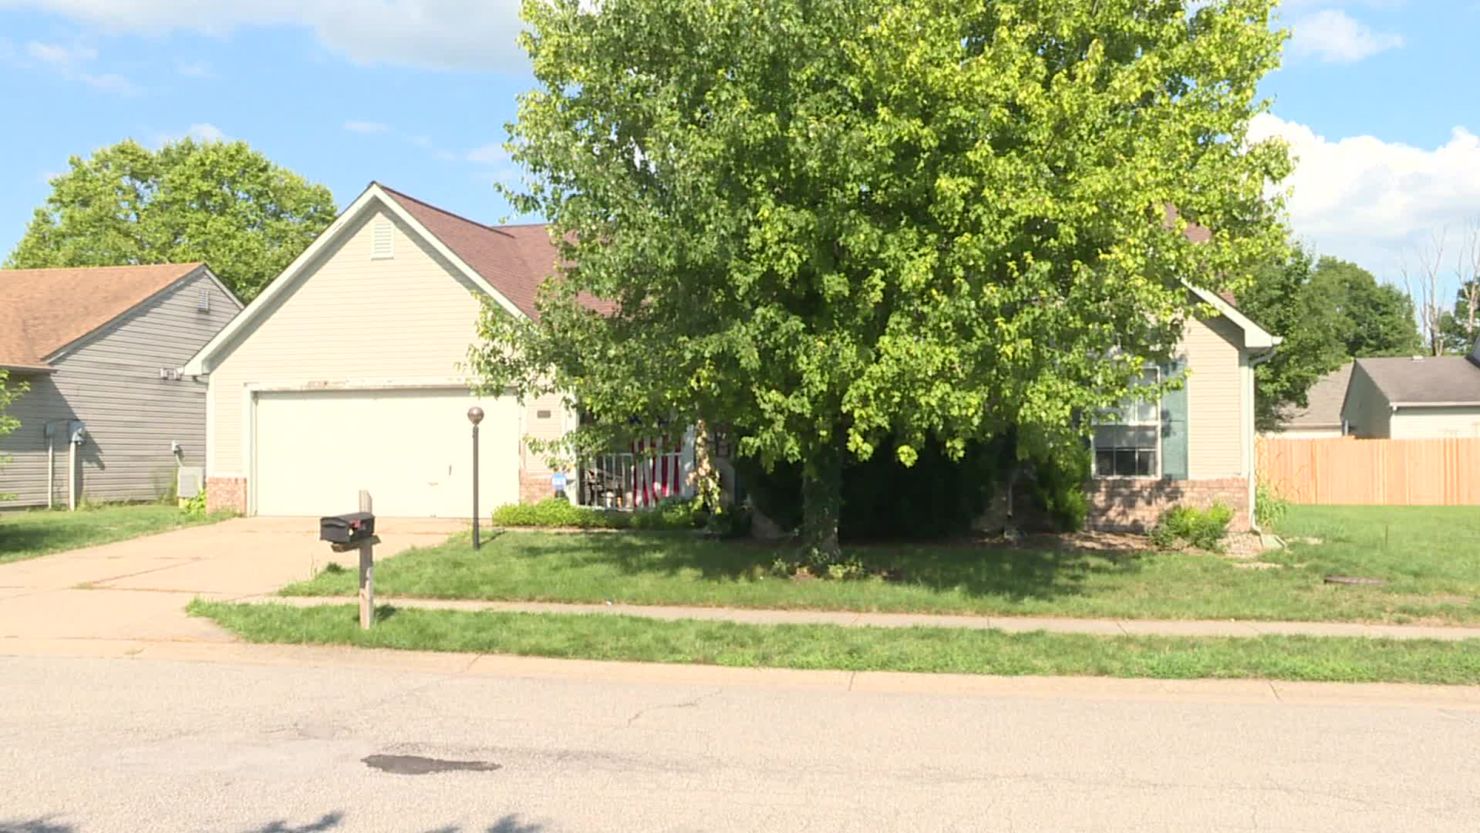 An Indiana man was charged with a hate crime for intimidating his Black neighbor after he began to cut down a tree on his own property.